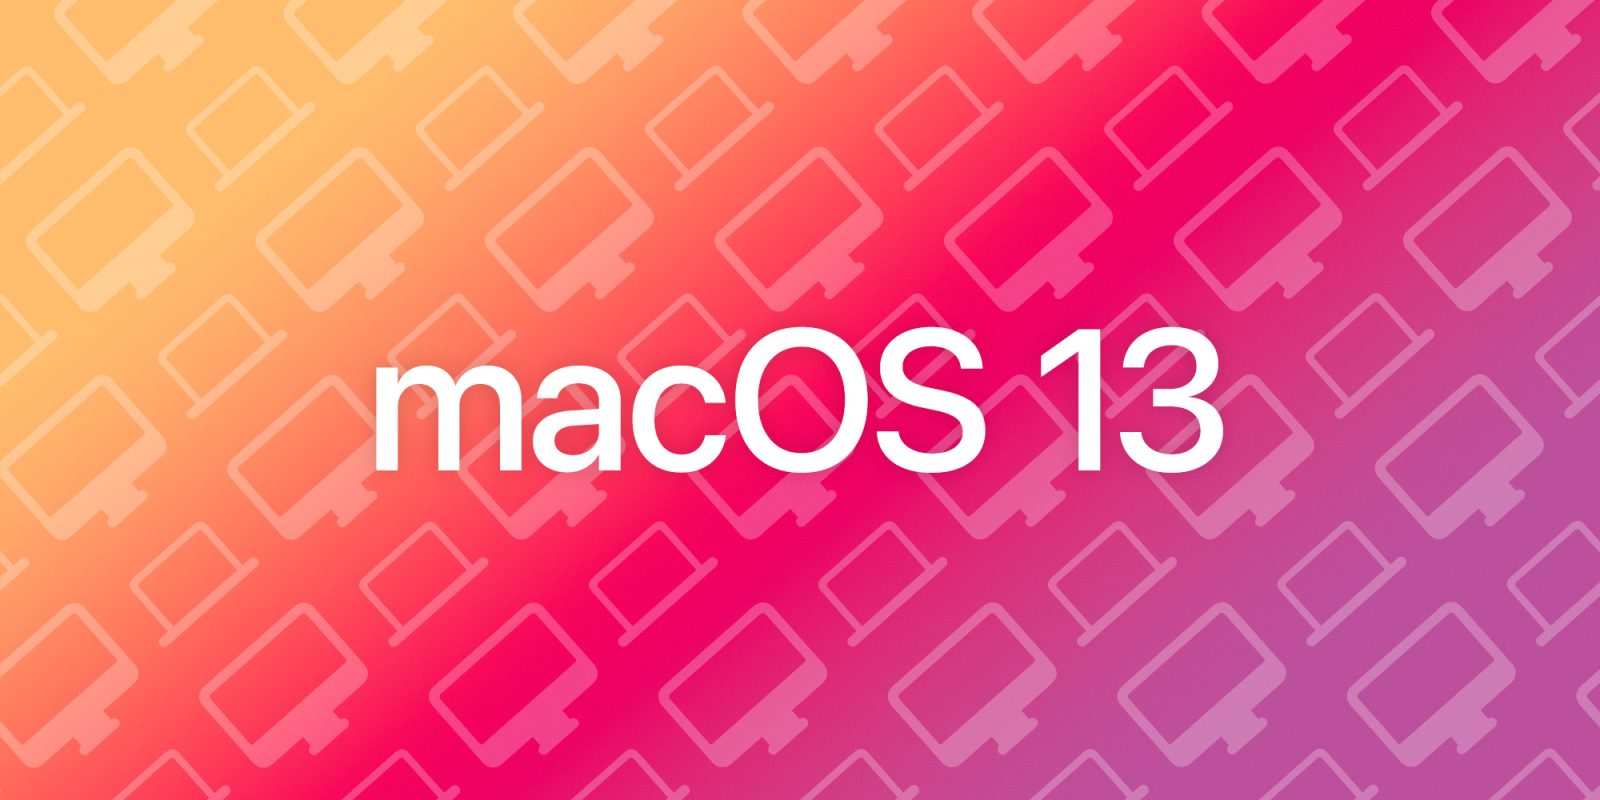 macOS 13: Here’s what we know so far about new features, supported devices, and more